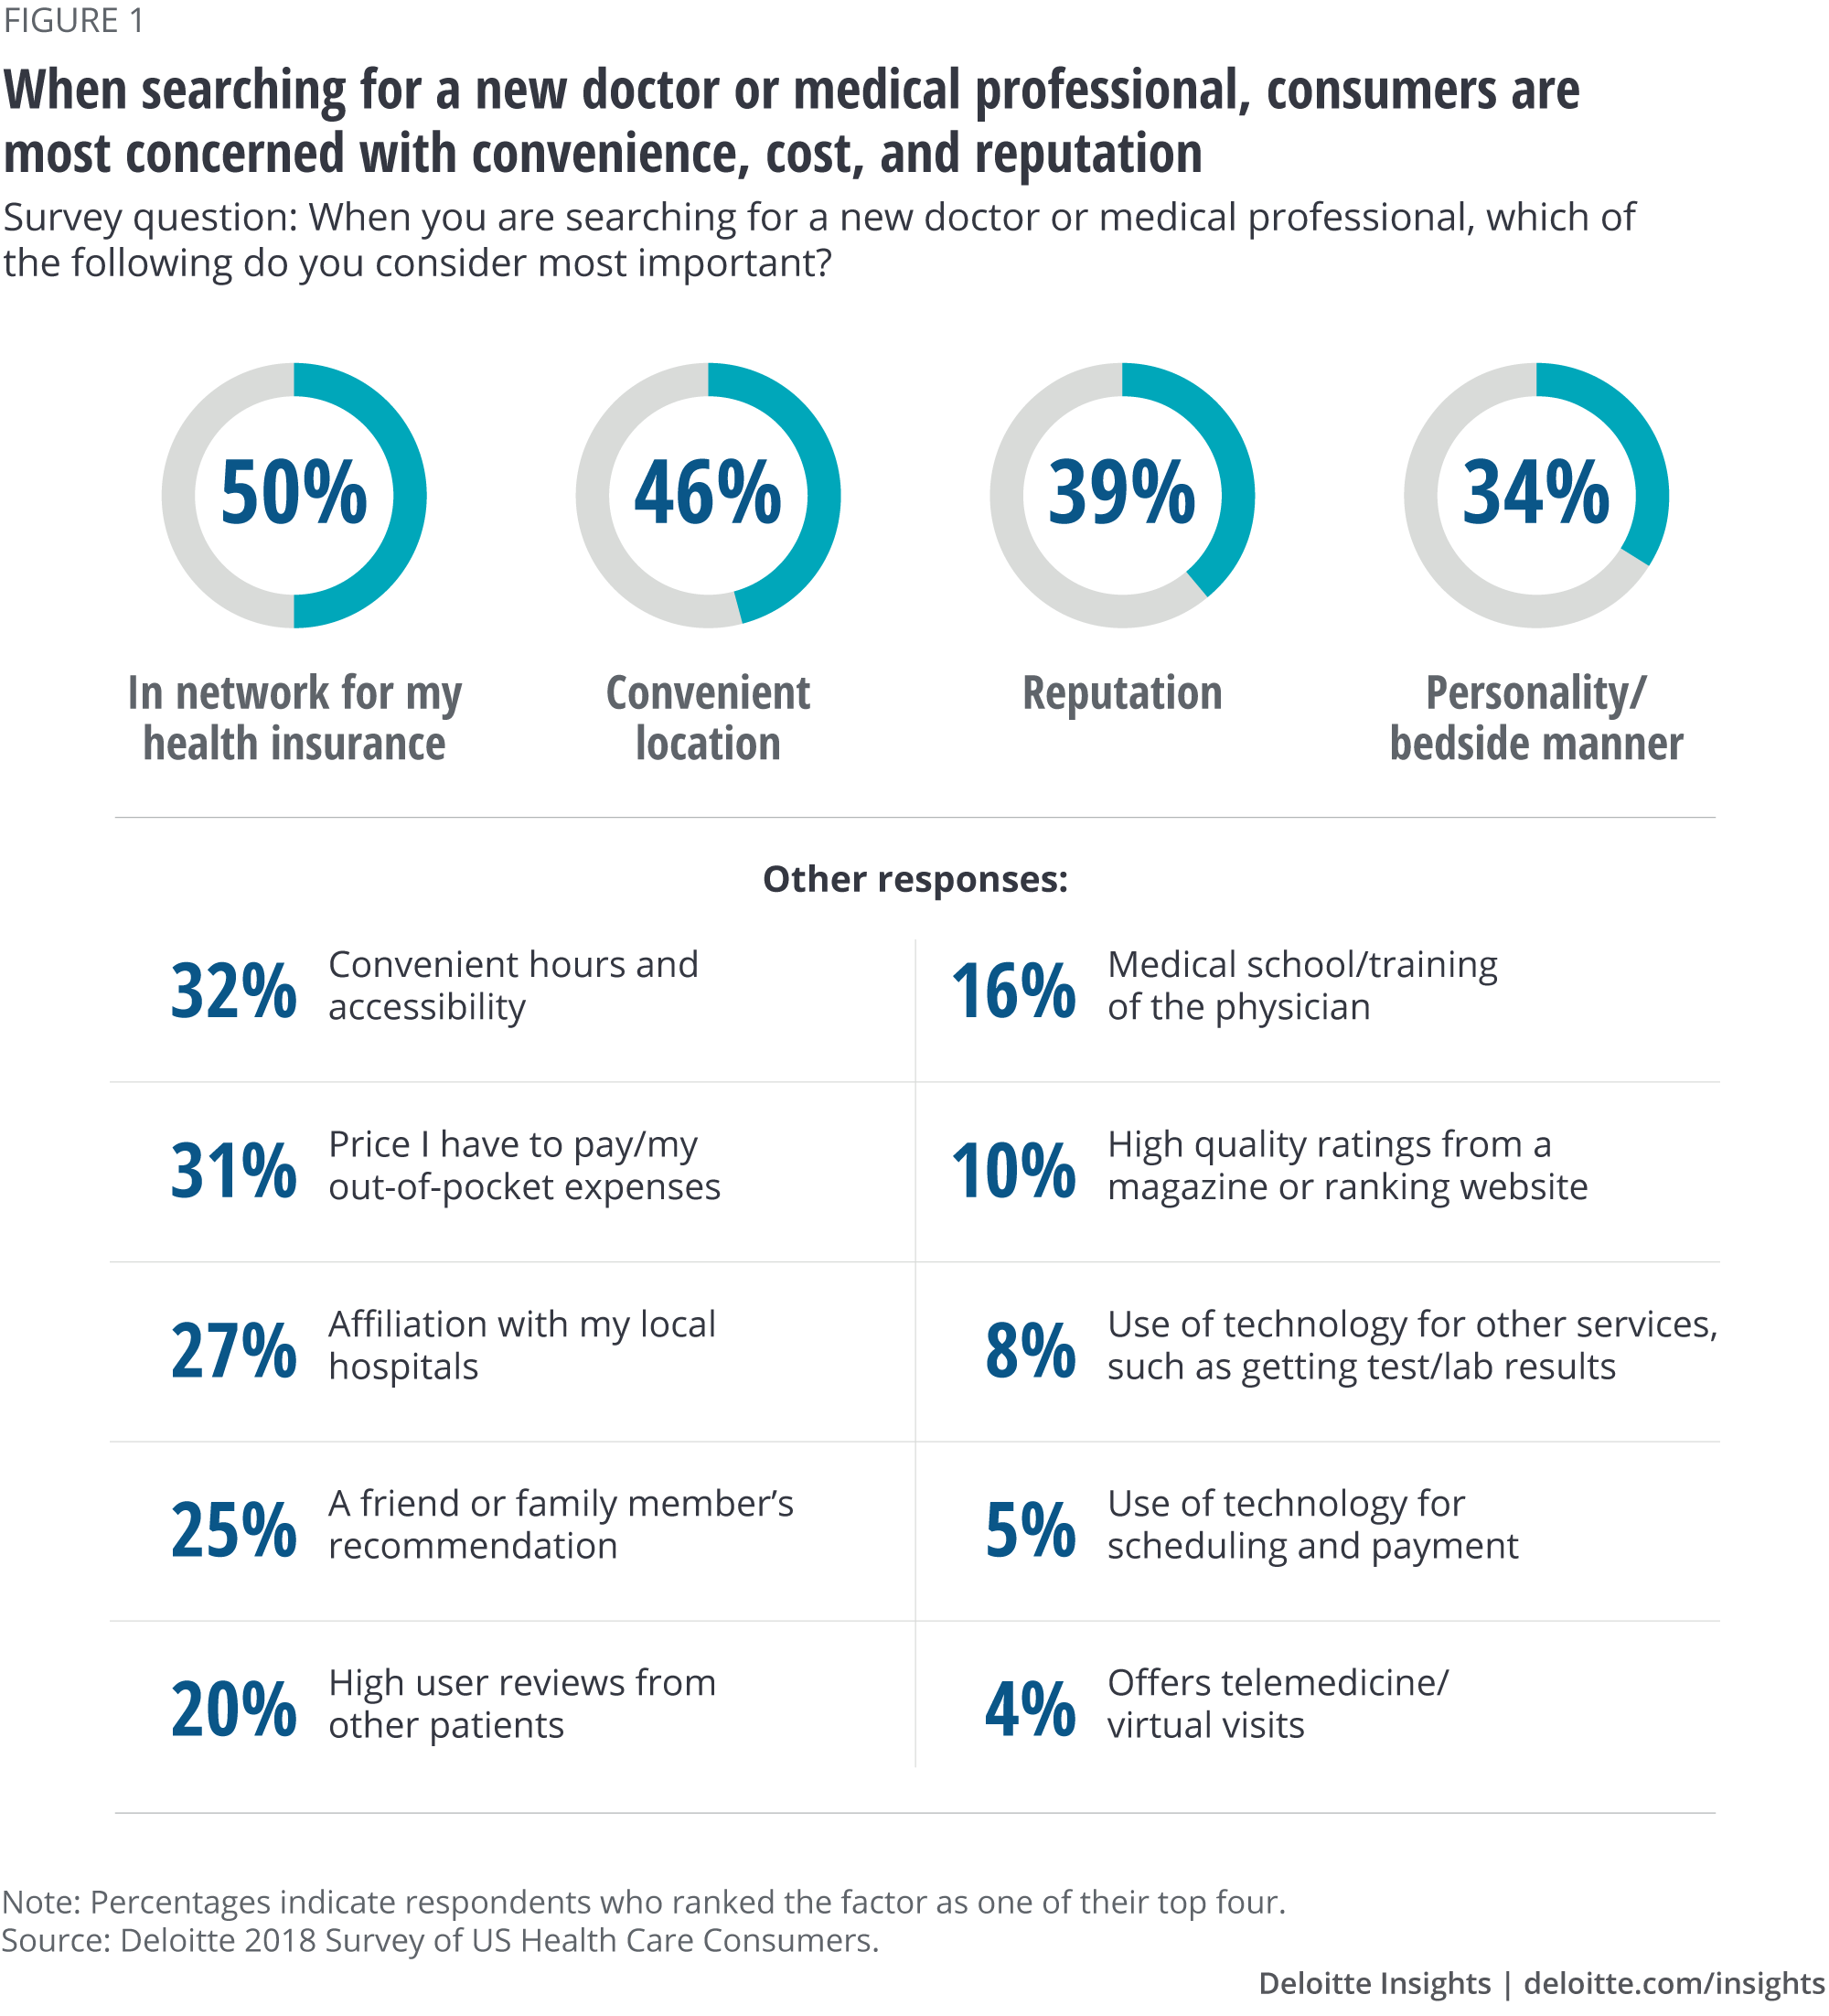 When searching for a new doctor or medical professional, consumers are most concerned with convenience, cost, and reputation